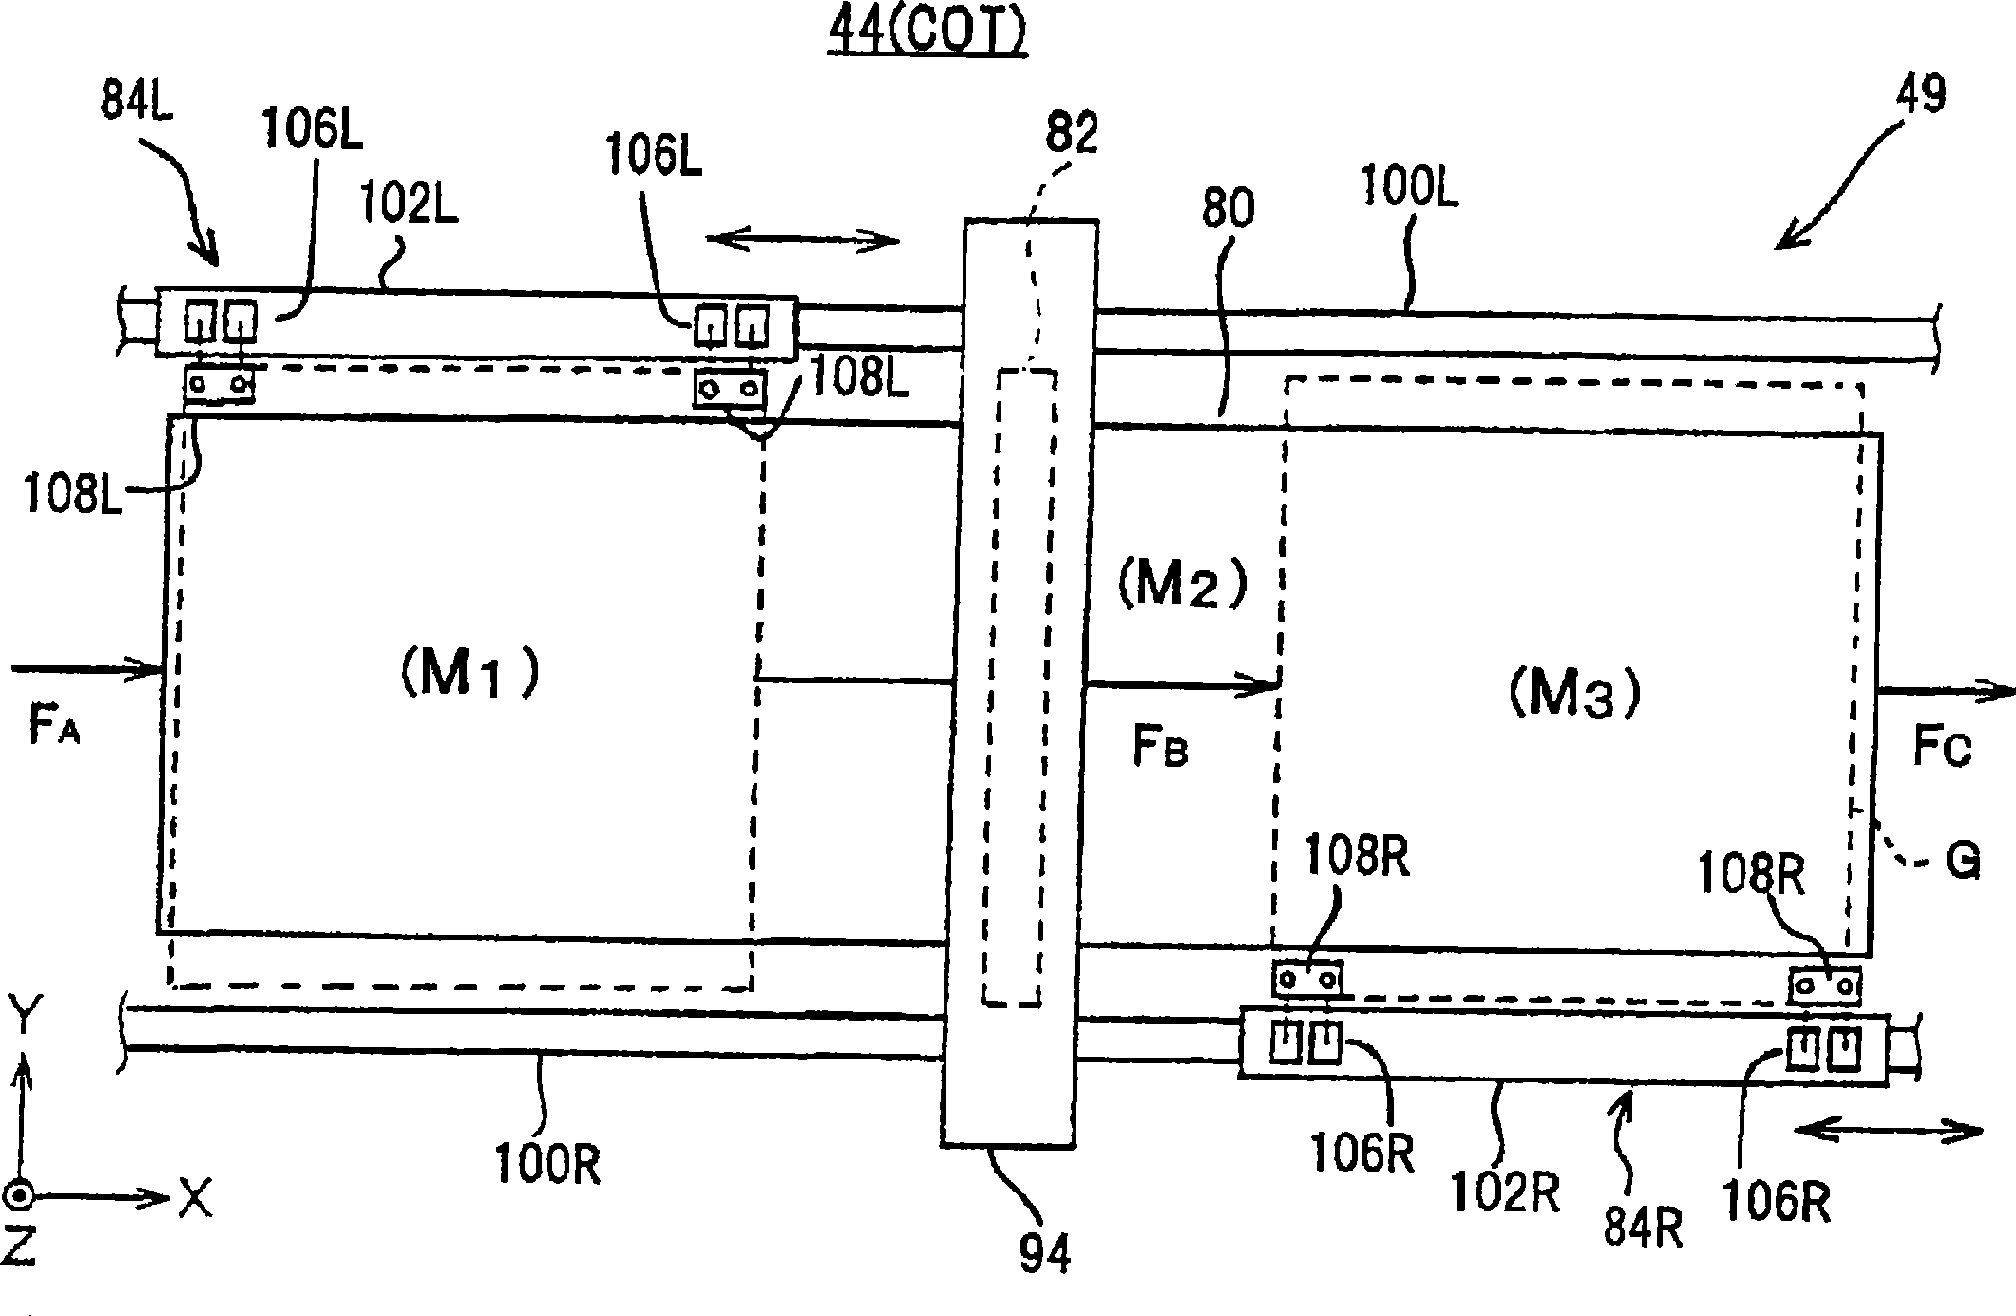 Substrate treatment device, coating device and coating method